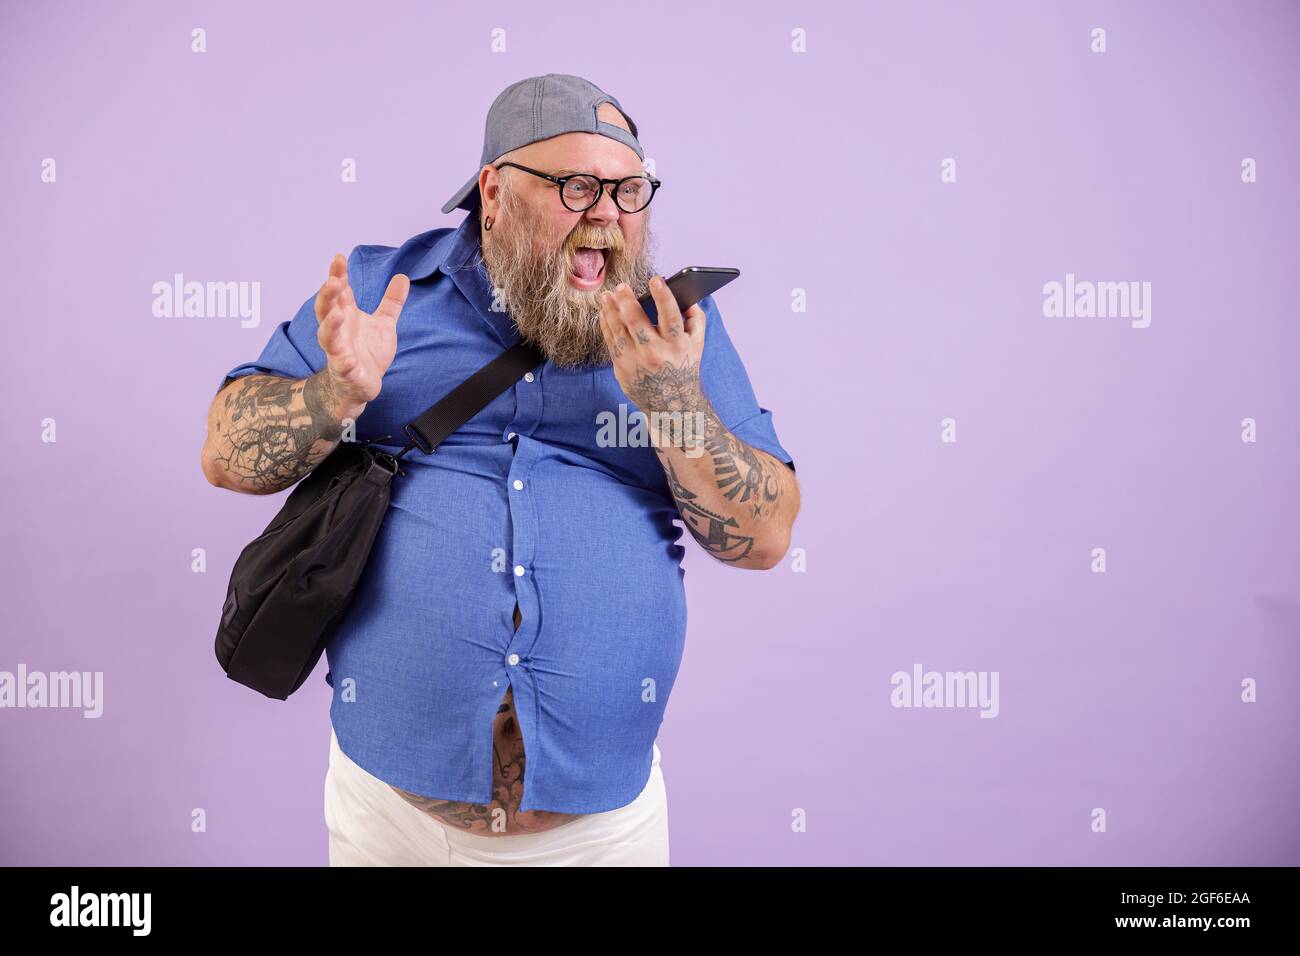 Angry man with overweight yells by phone using loudspeaker mode on purple background Stock Photo